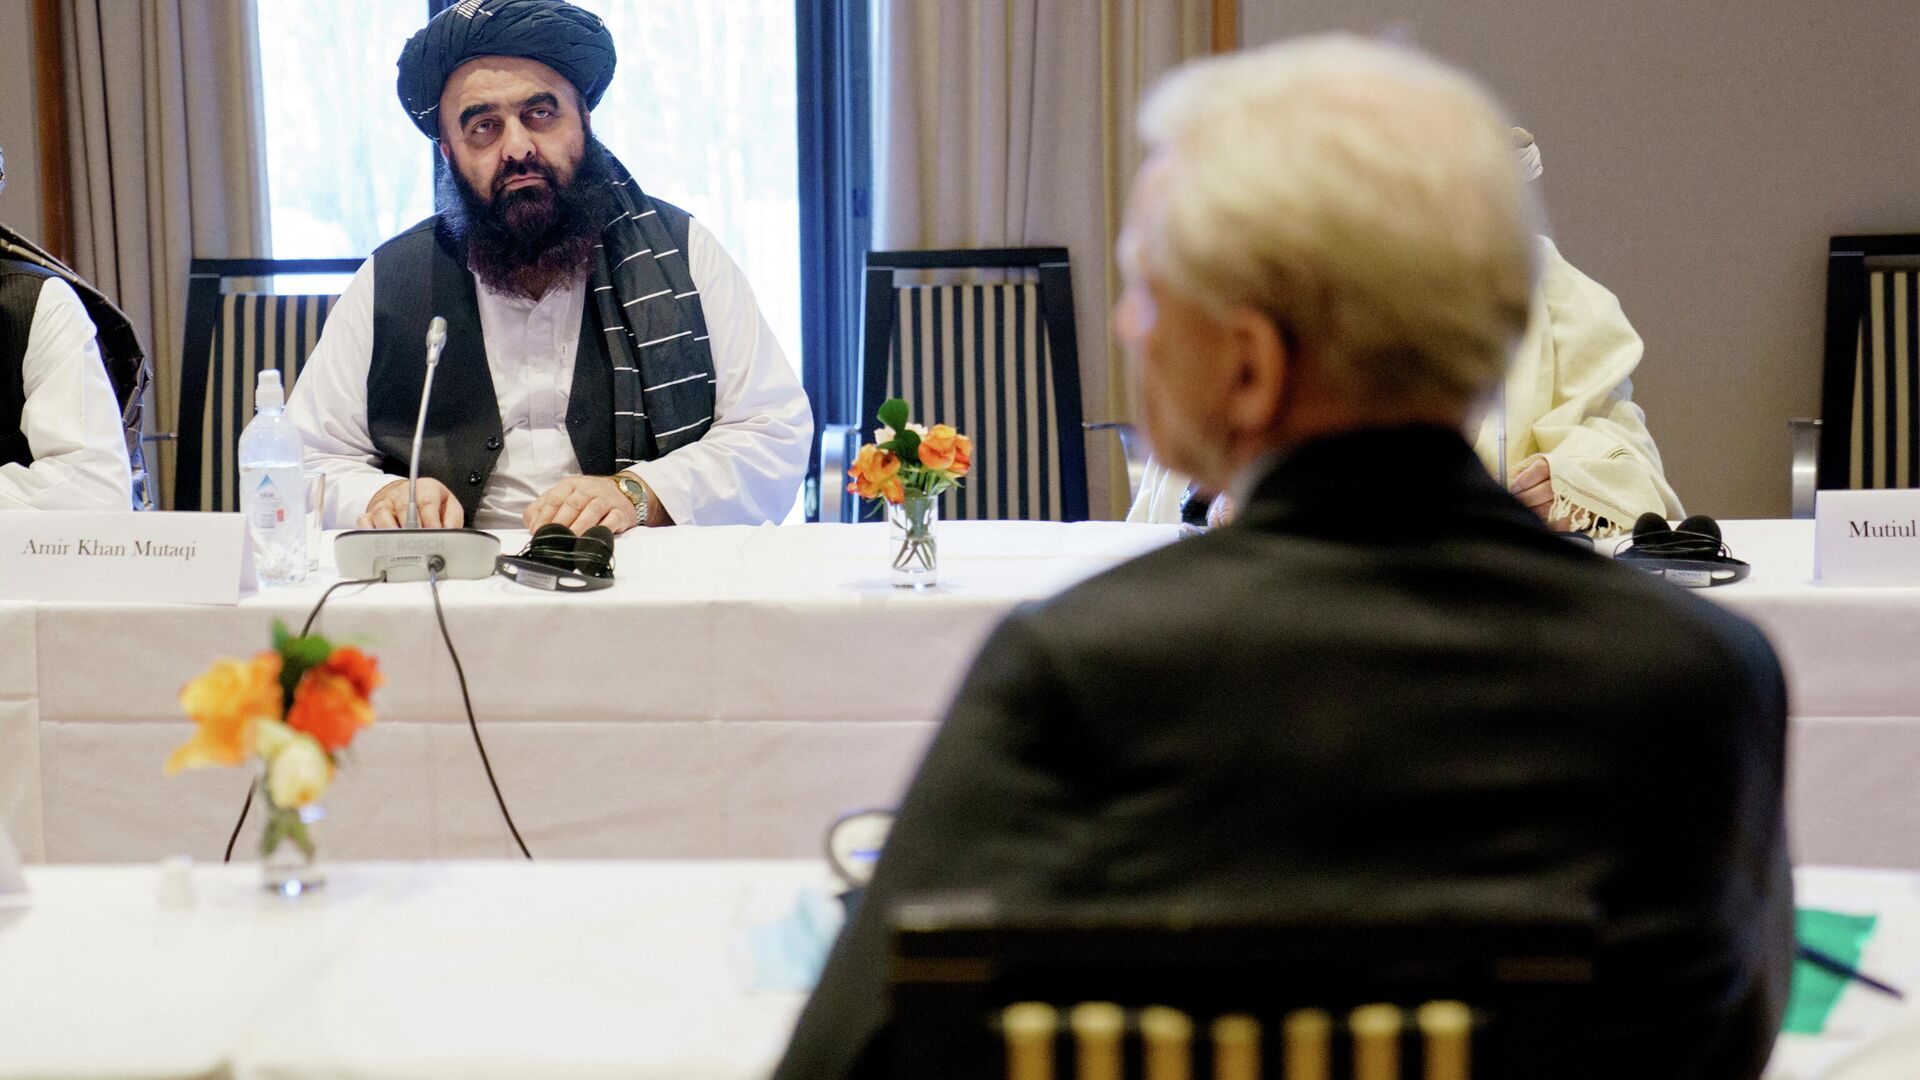 Afghan Taliban's Foreign Minister Amir Khan Muttaqi and Secretary-General of the Norwegian Refugee Council Jan Egeland attend the meeting at the Soria Moria hotel in Oslo, Norway January 25, 2022.  - Sputnik International, 1920, 26.01.2022